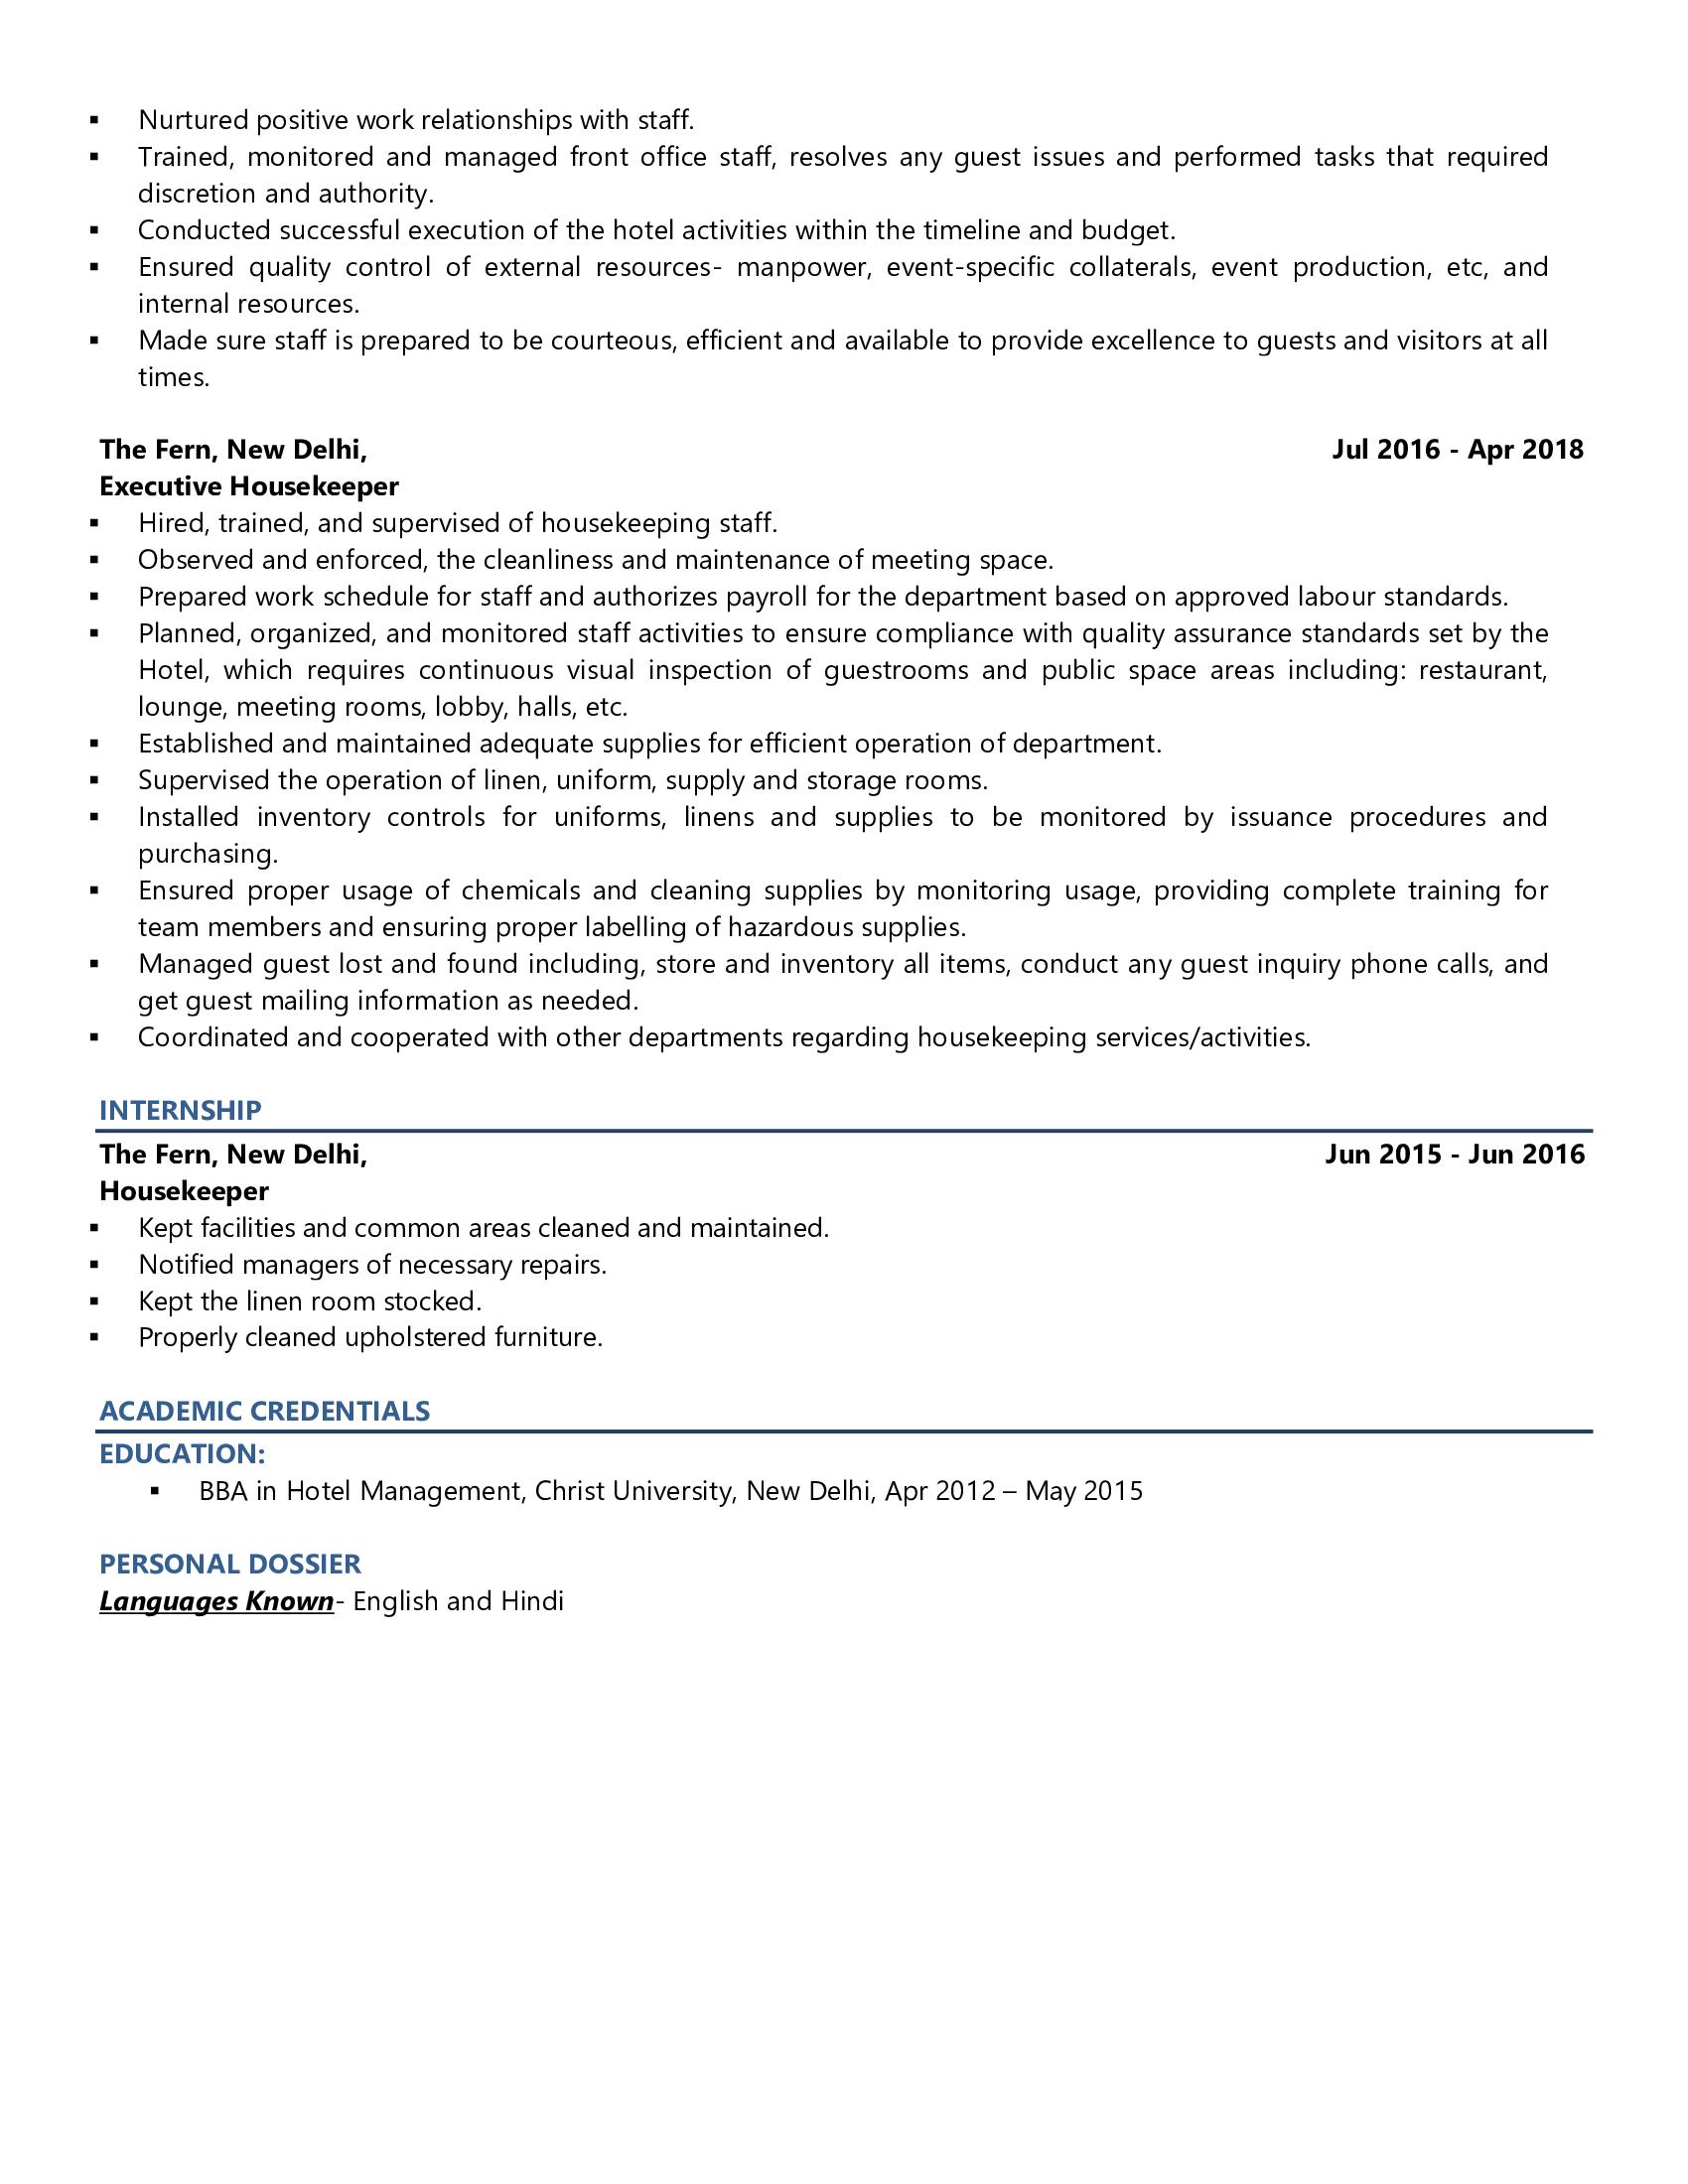 Hotel General Manager - Resume Example & Template